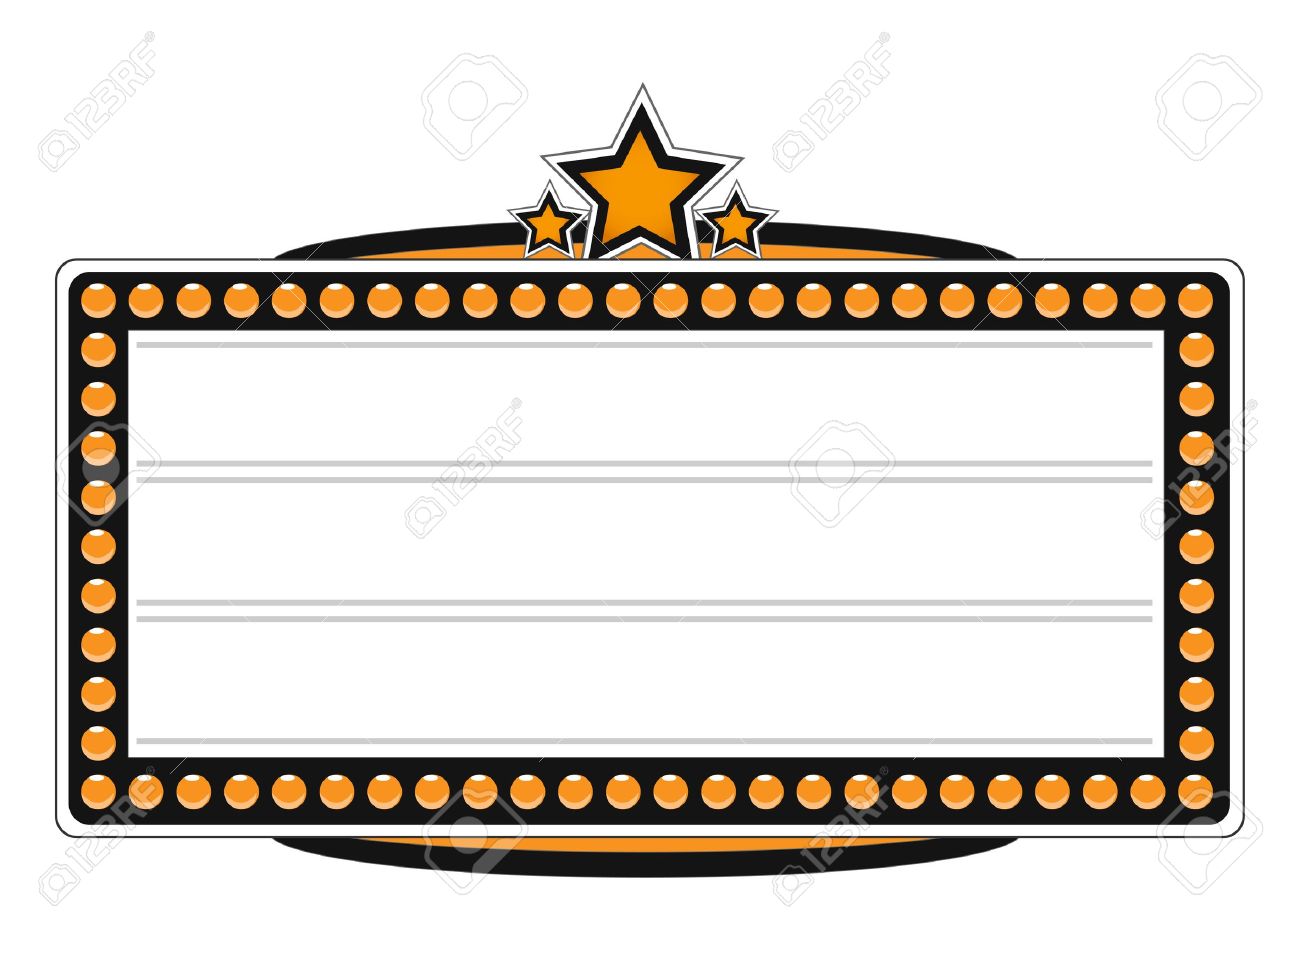 Movie theater marquee clipart.